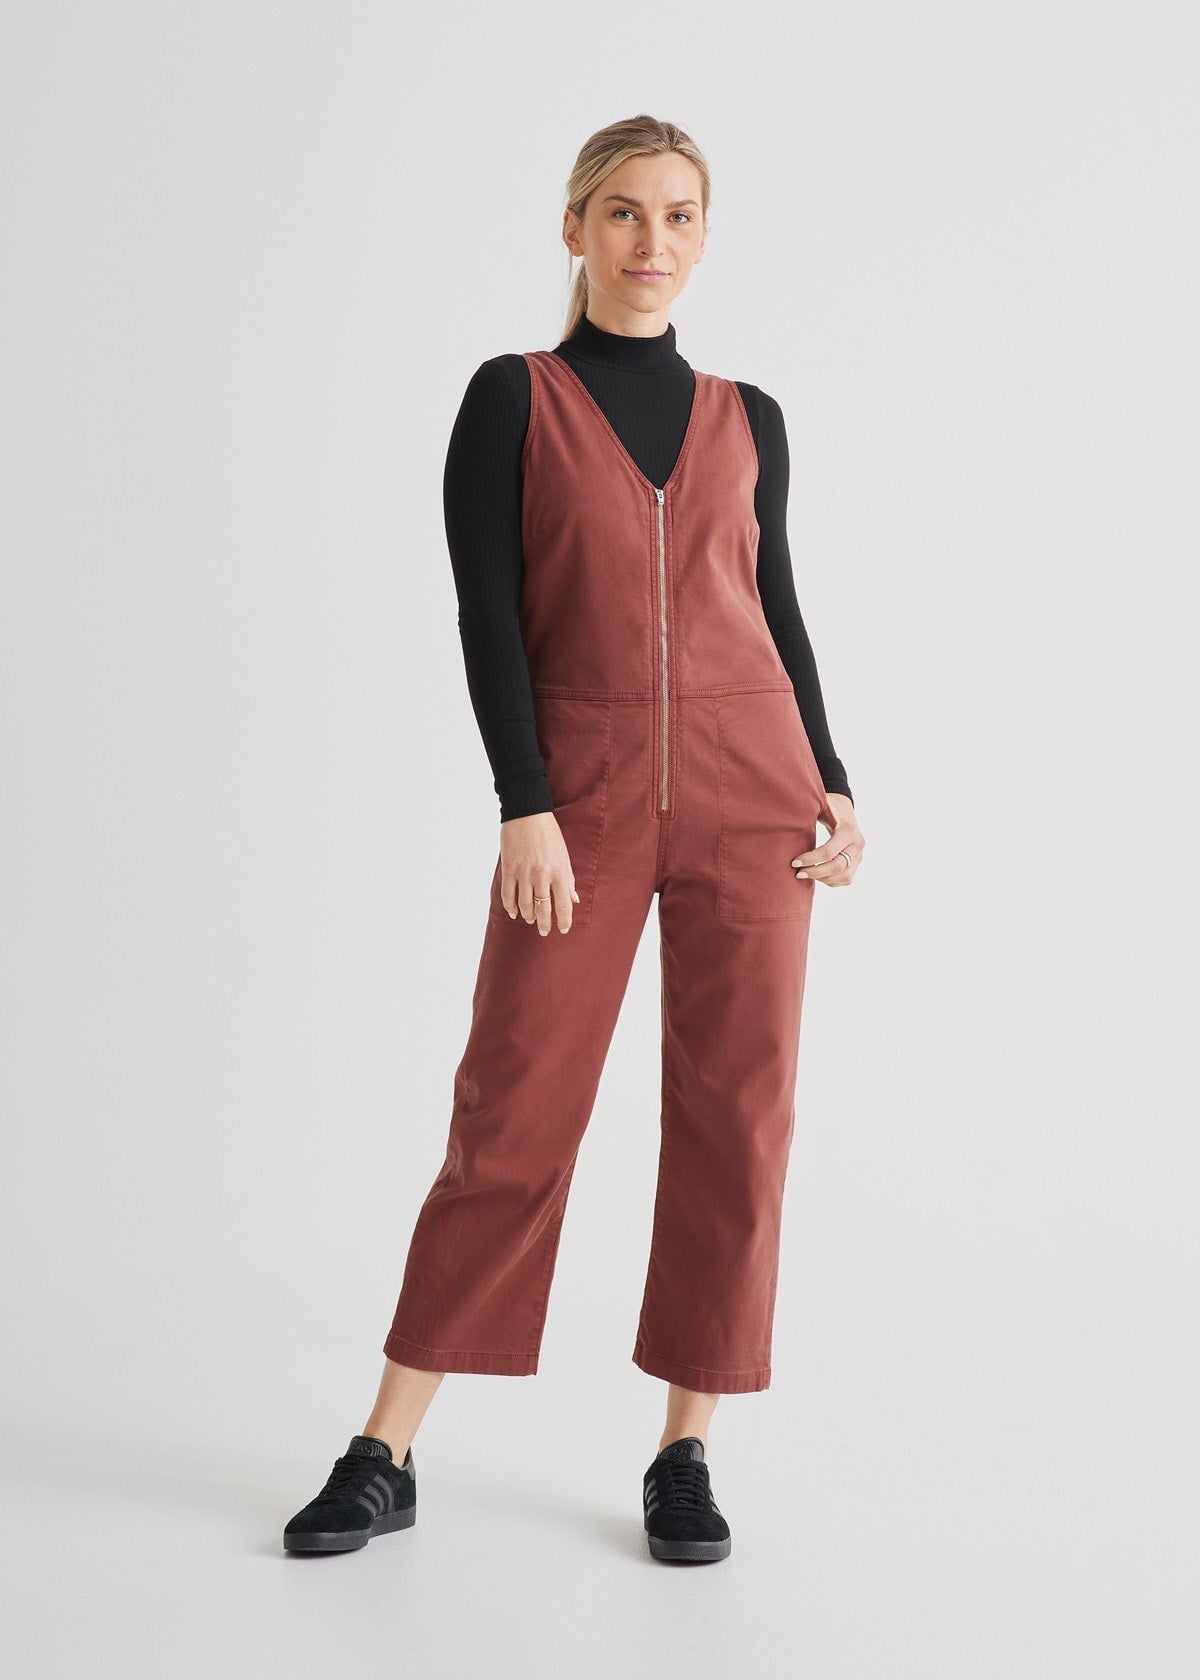 women's copper Live free jumpsuit full body front 